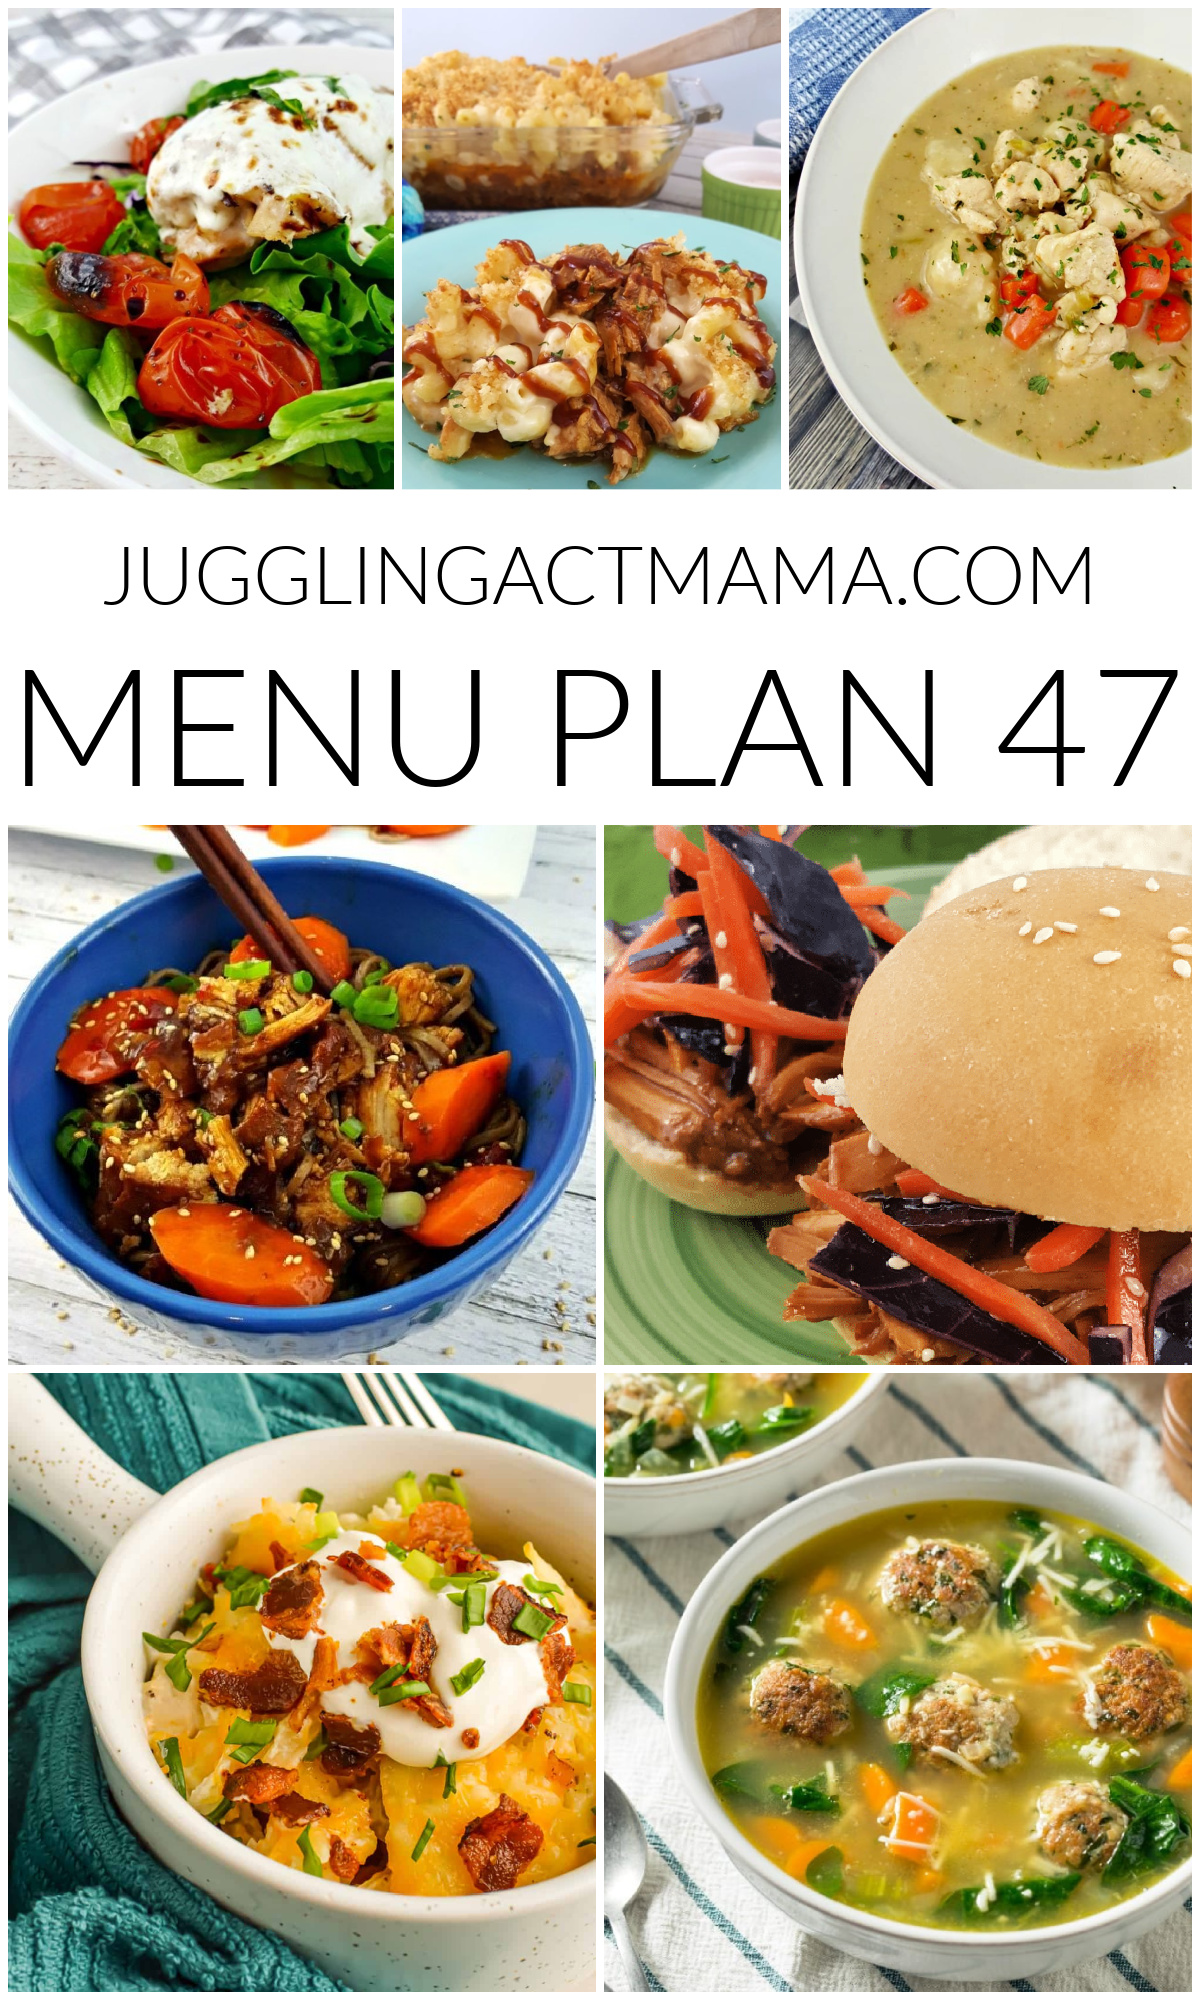 Meal Plan 47 collage image with text overlay.